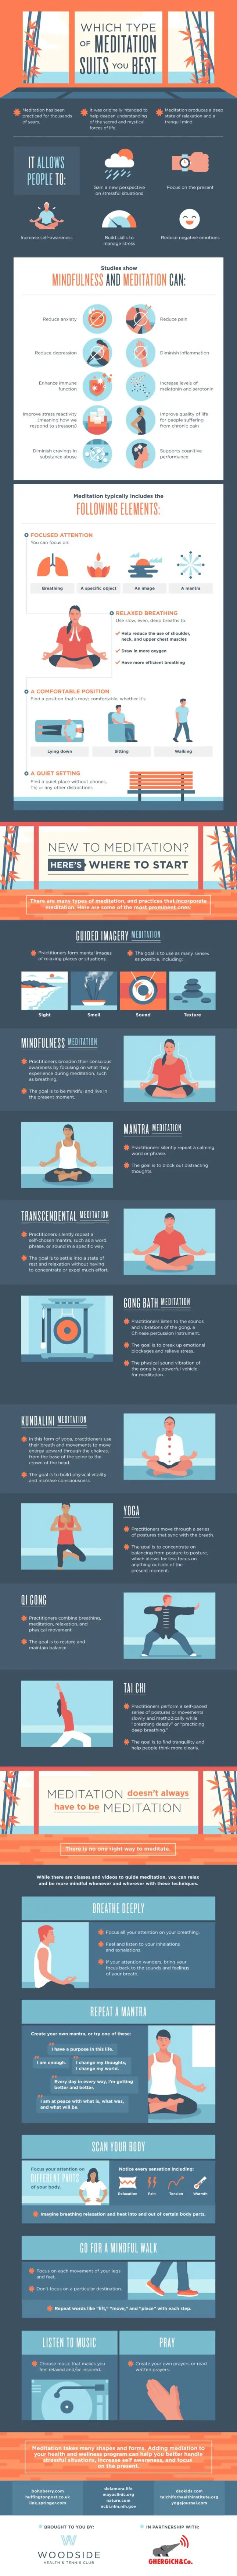 15 Types of Meditation - Many of these meditation practices are suitable for use in your every day life - you'll discover that not all meditation requires you to be still, in silence or sitting cross legged!